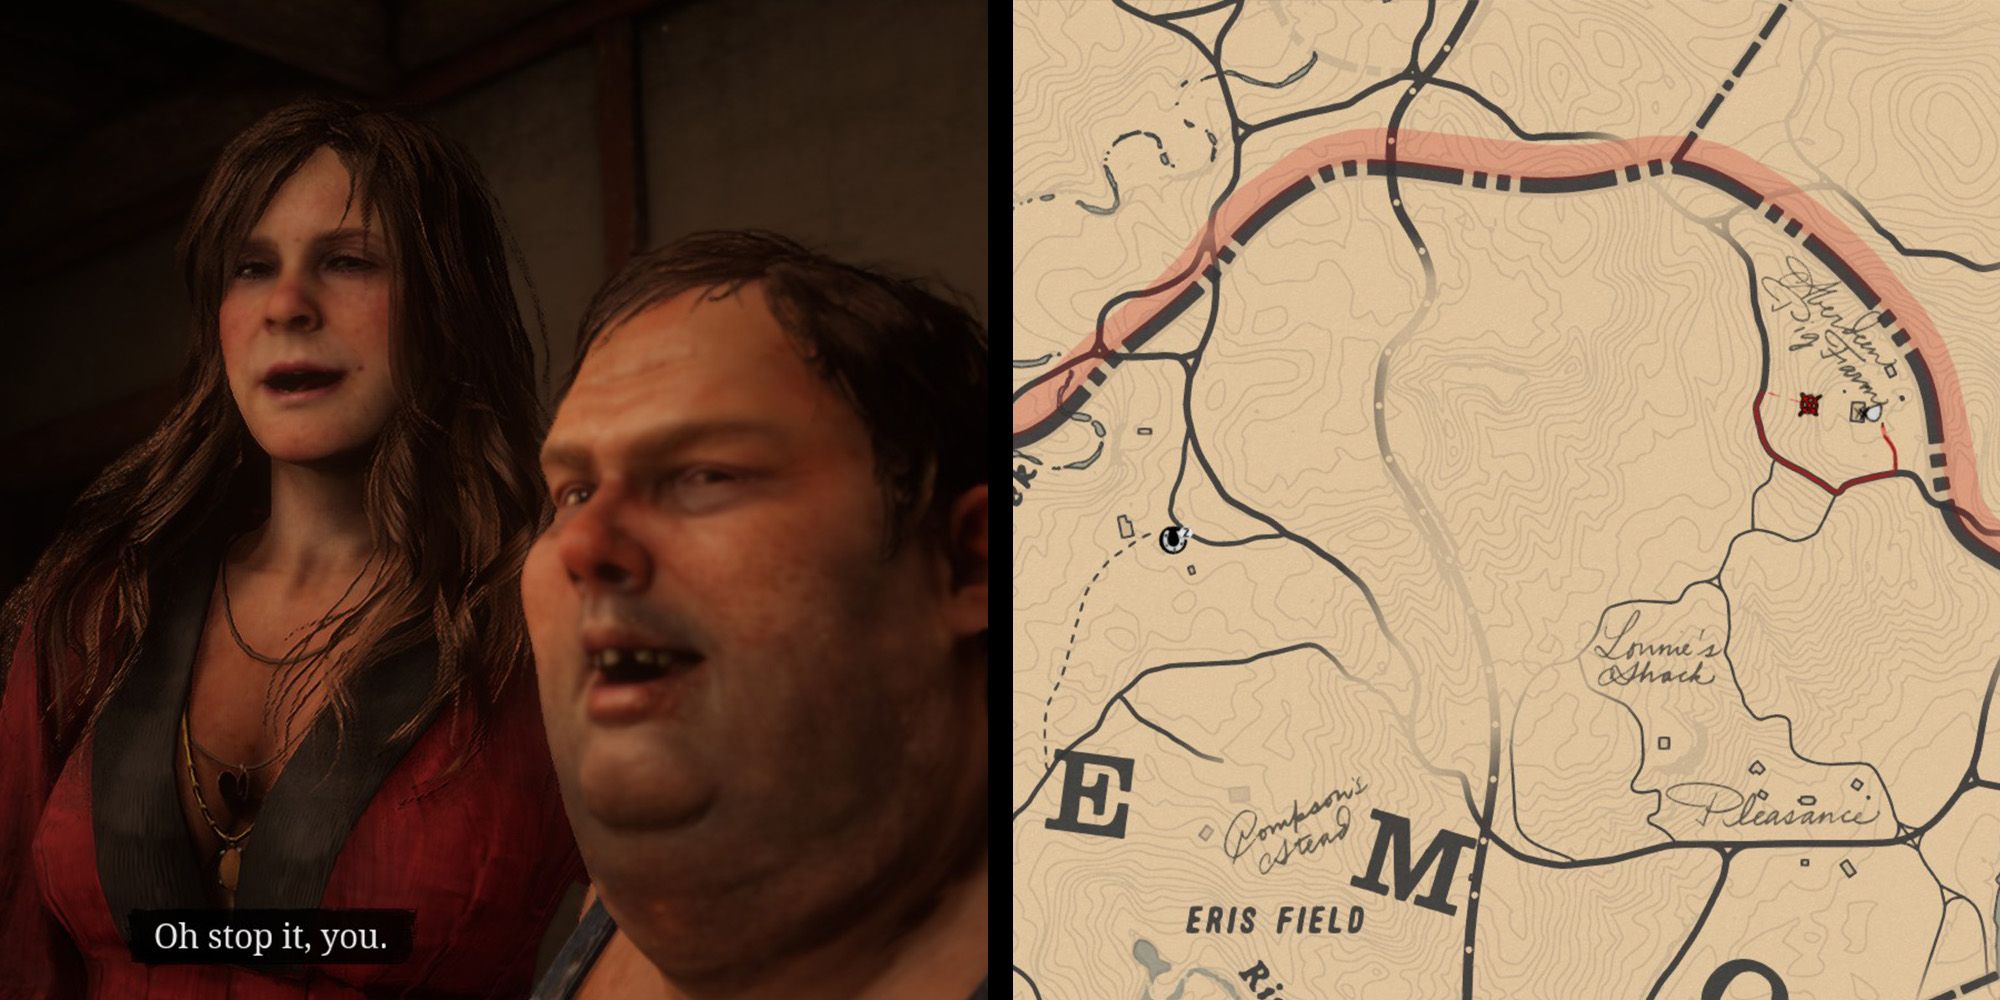 The Aberdeen Siblings and the location of their pig farm in Red Dead Redemption 2